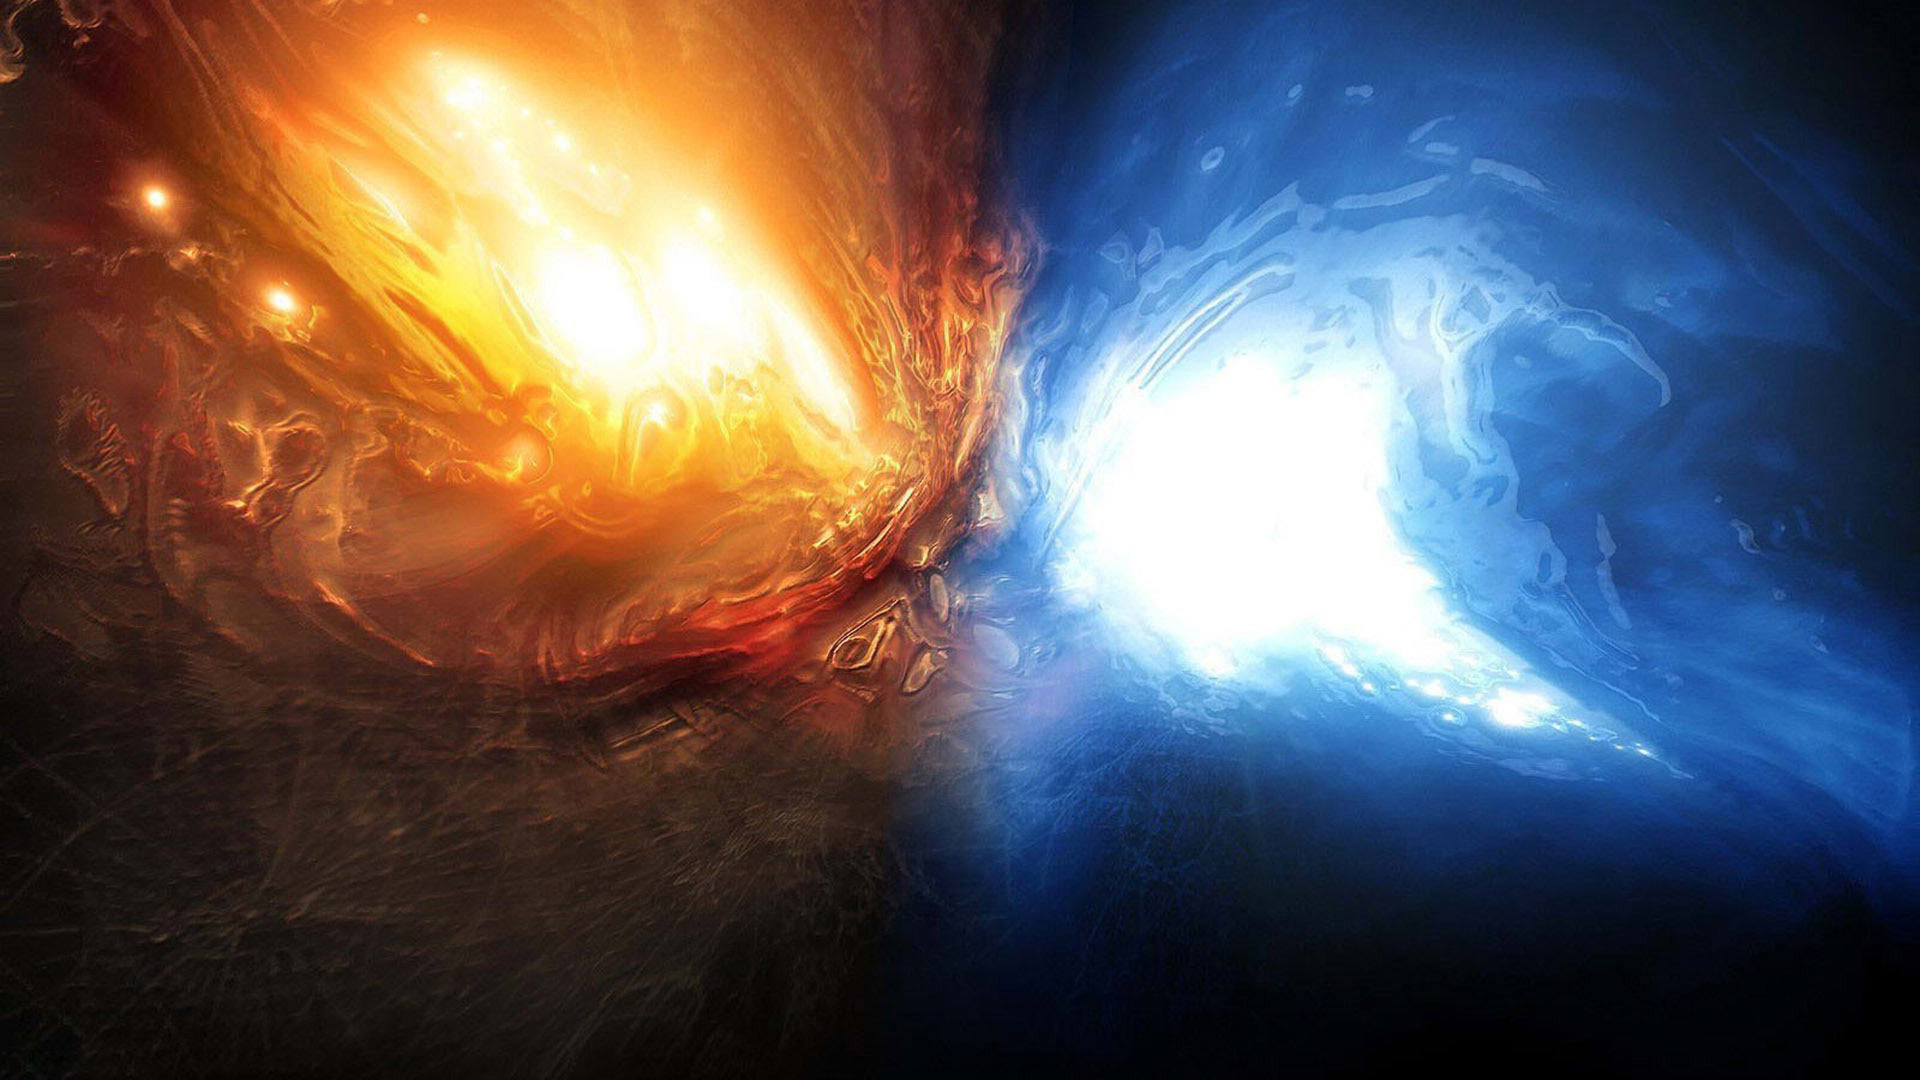 Fire Vs Ice Wallpaper Earth Blue And Red 19x1080 Wallpaper Teahub Io